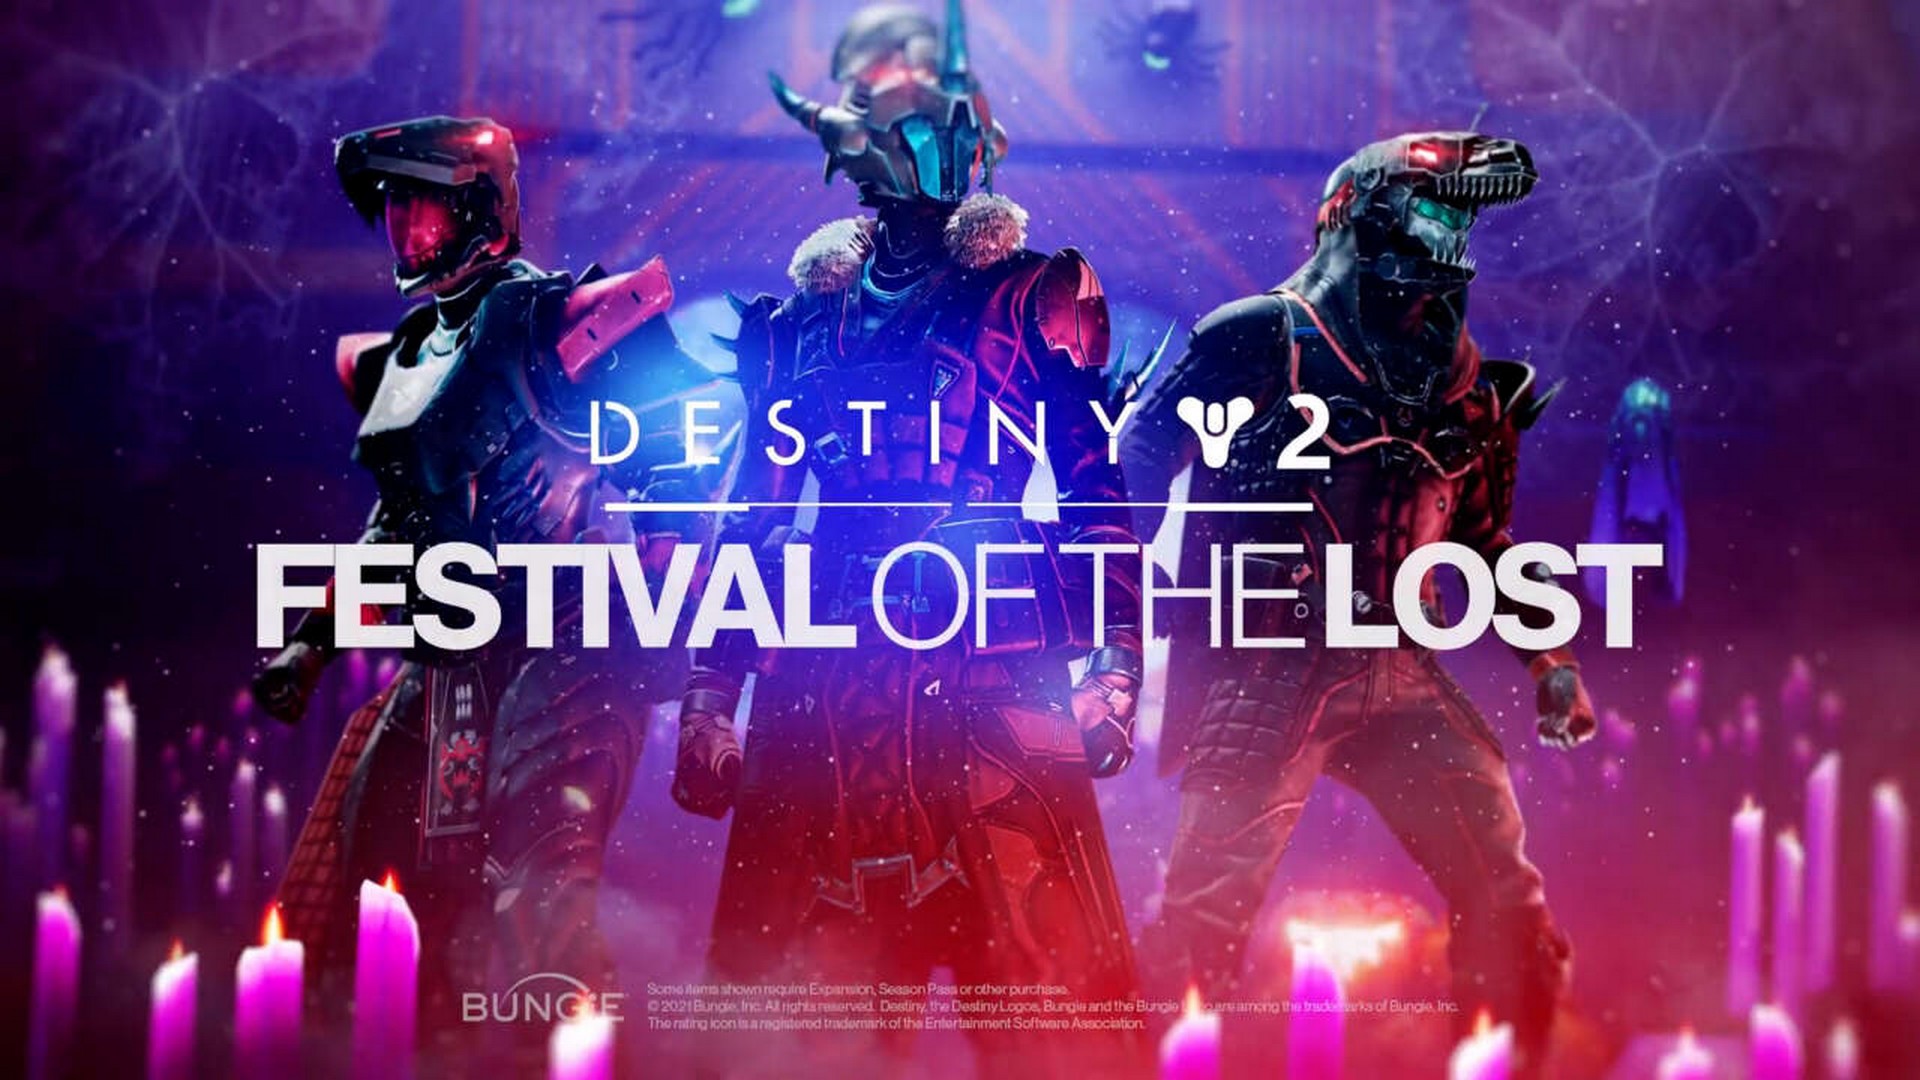 Festival Of The Lost Event Returns To Destiny 2 – Free For All Players